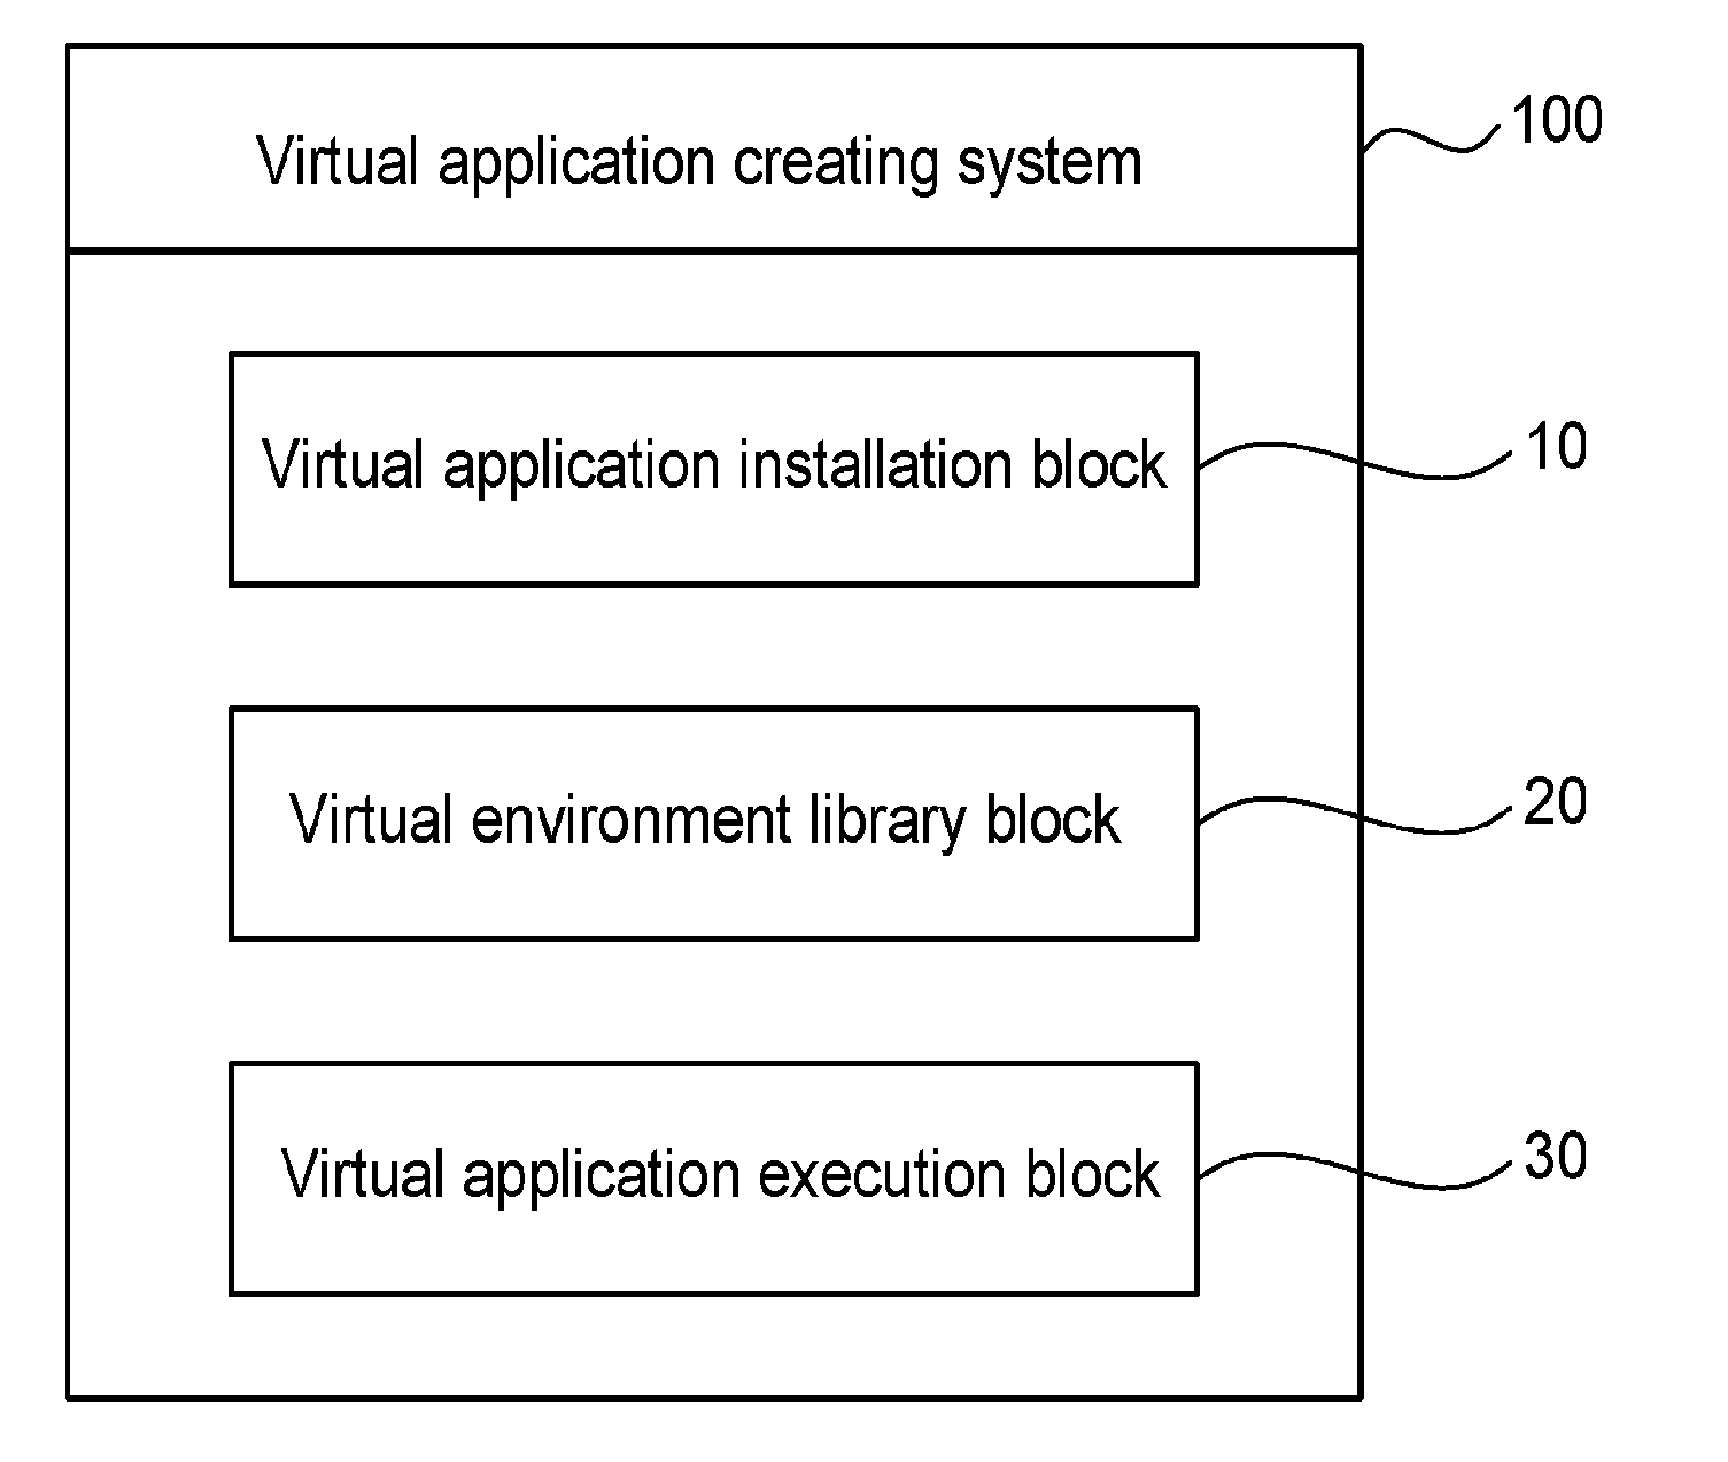 System for creating virtual application, method for installing virtual application, method for calling native api and method for executing virtual application